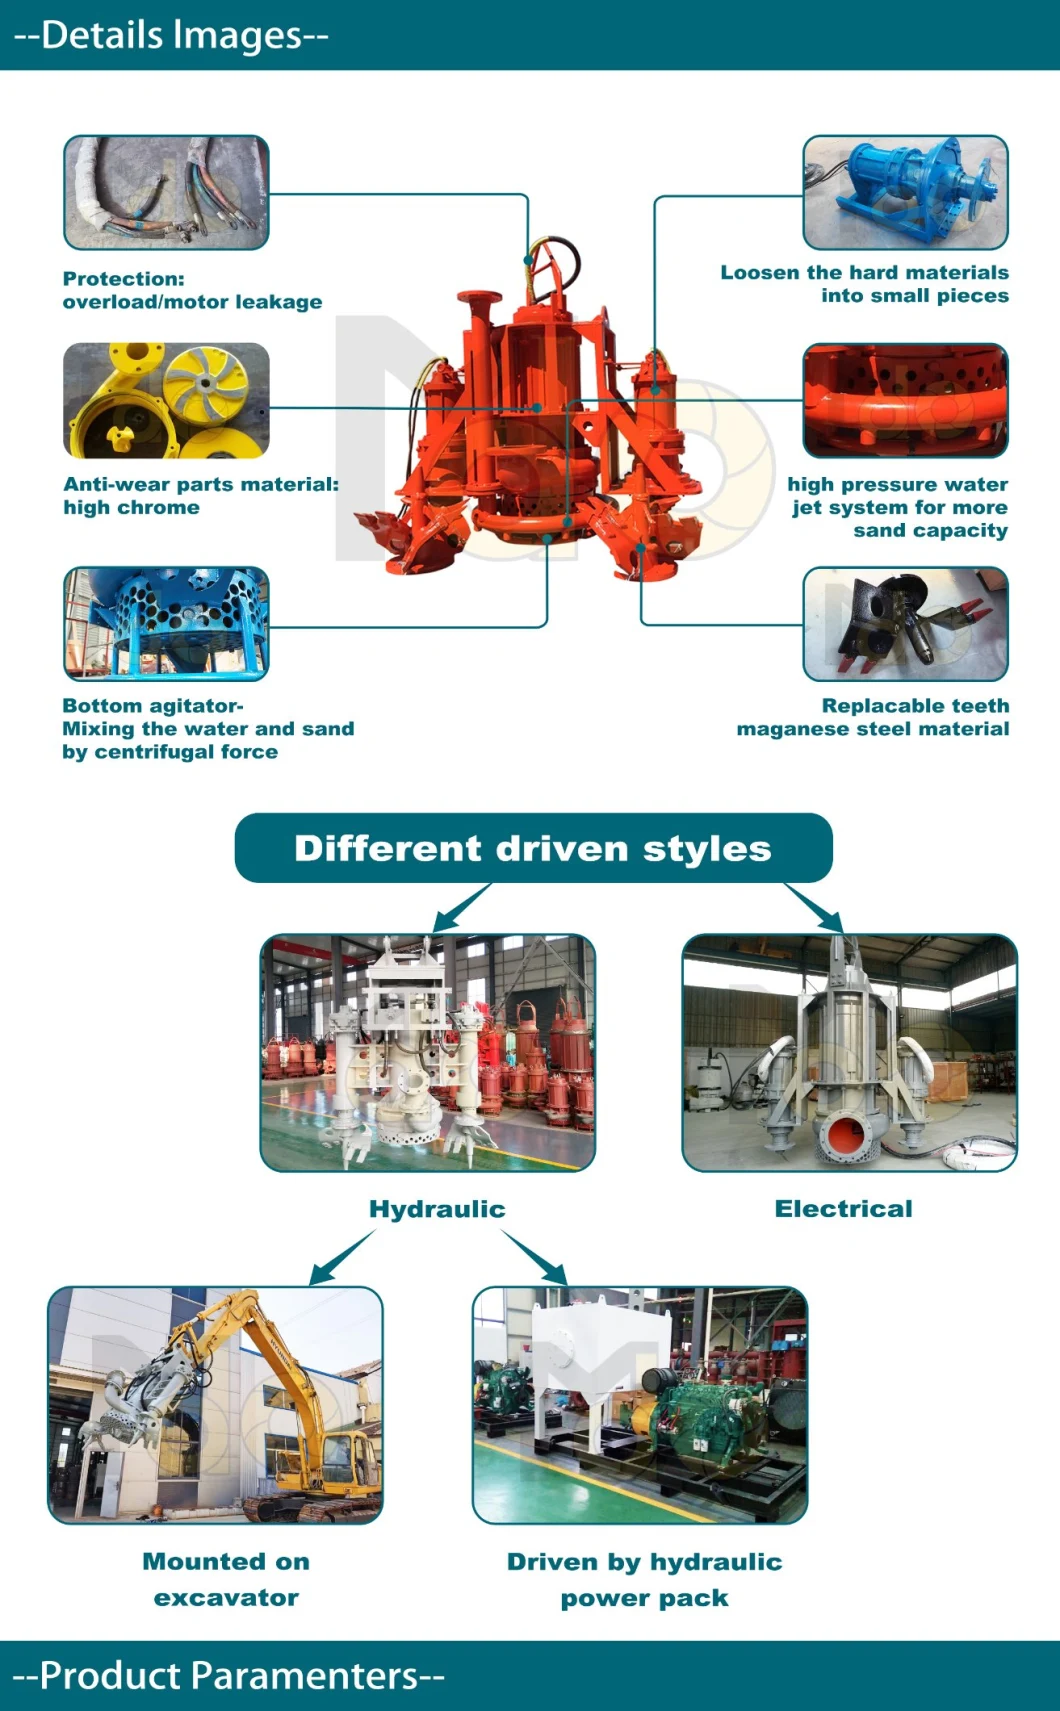 Automation Horizontal Small Submersible Solid Diesel Sand Slurry Water Pump for Civil Construction